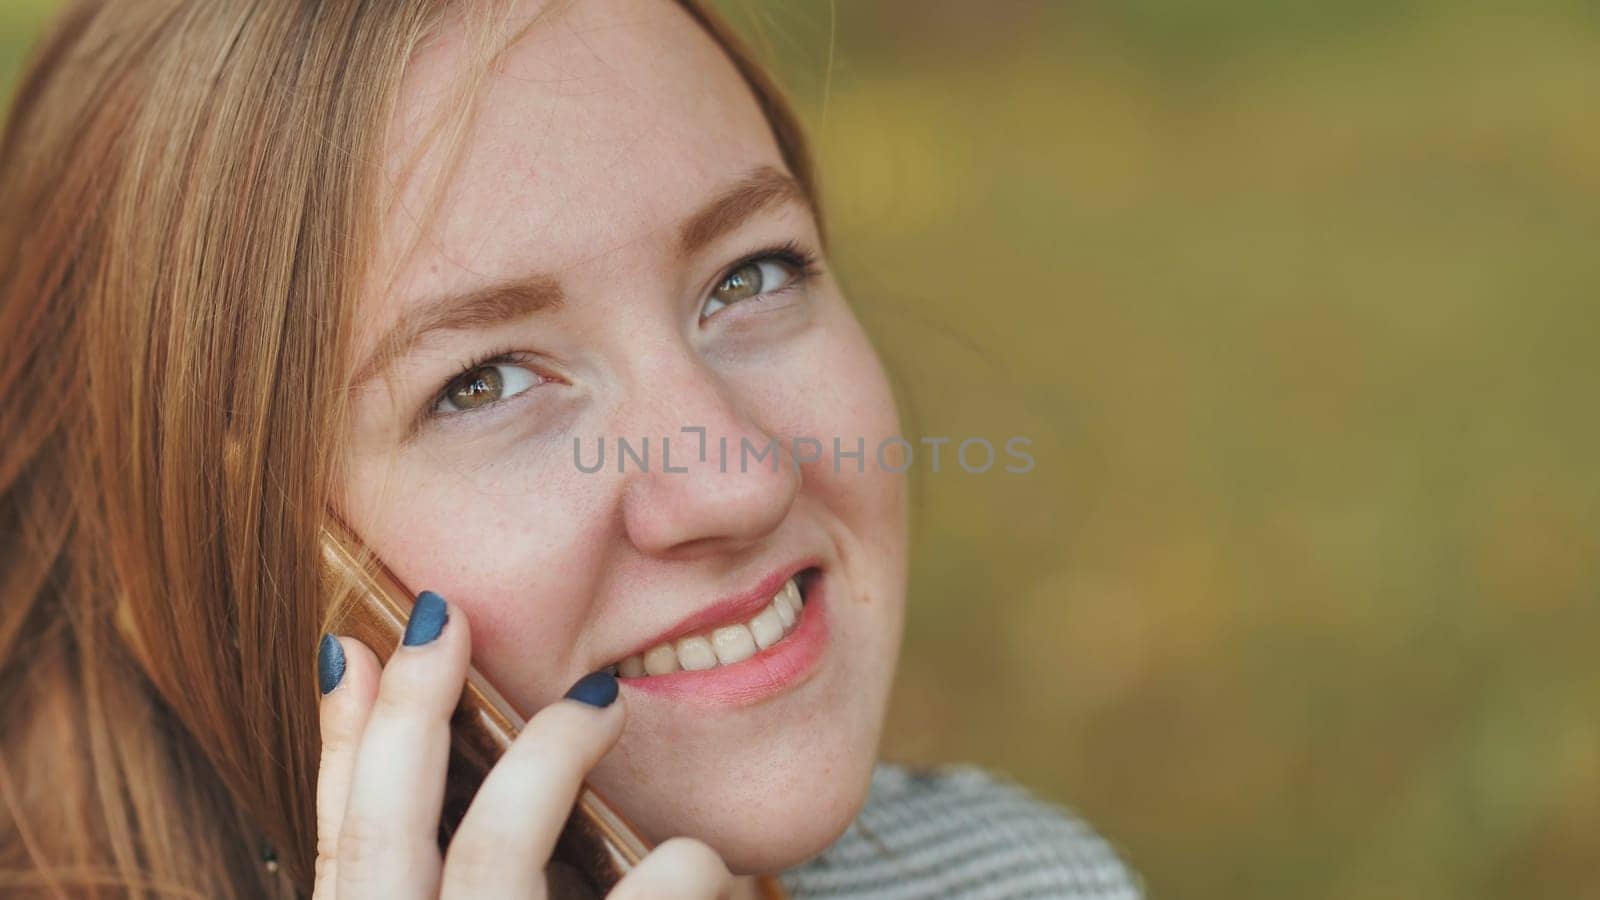 A young girl talking on the phone. Close-up of her face